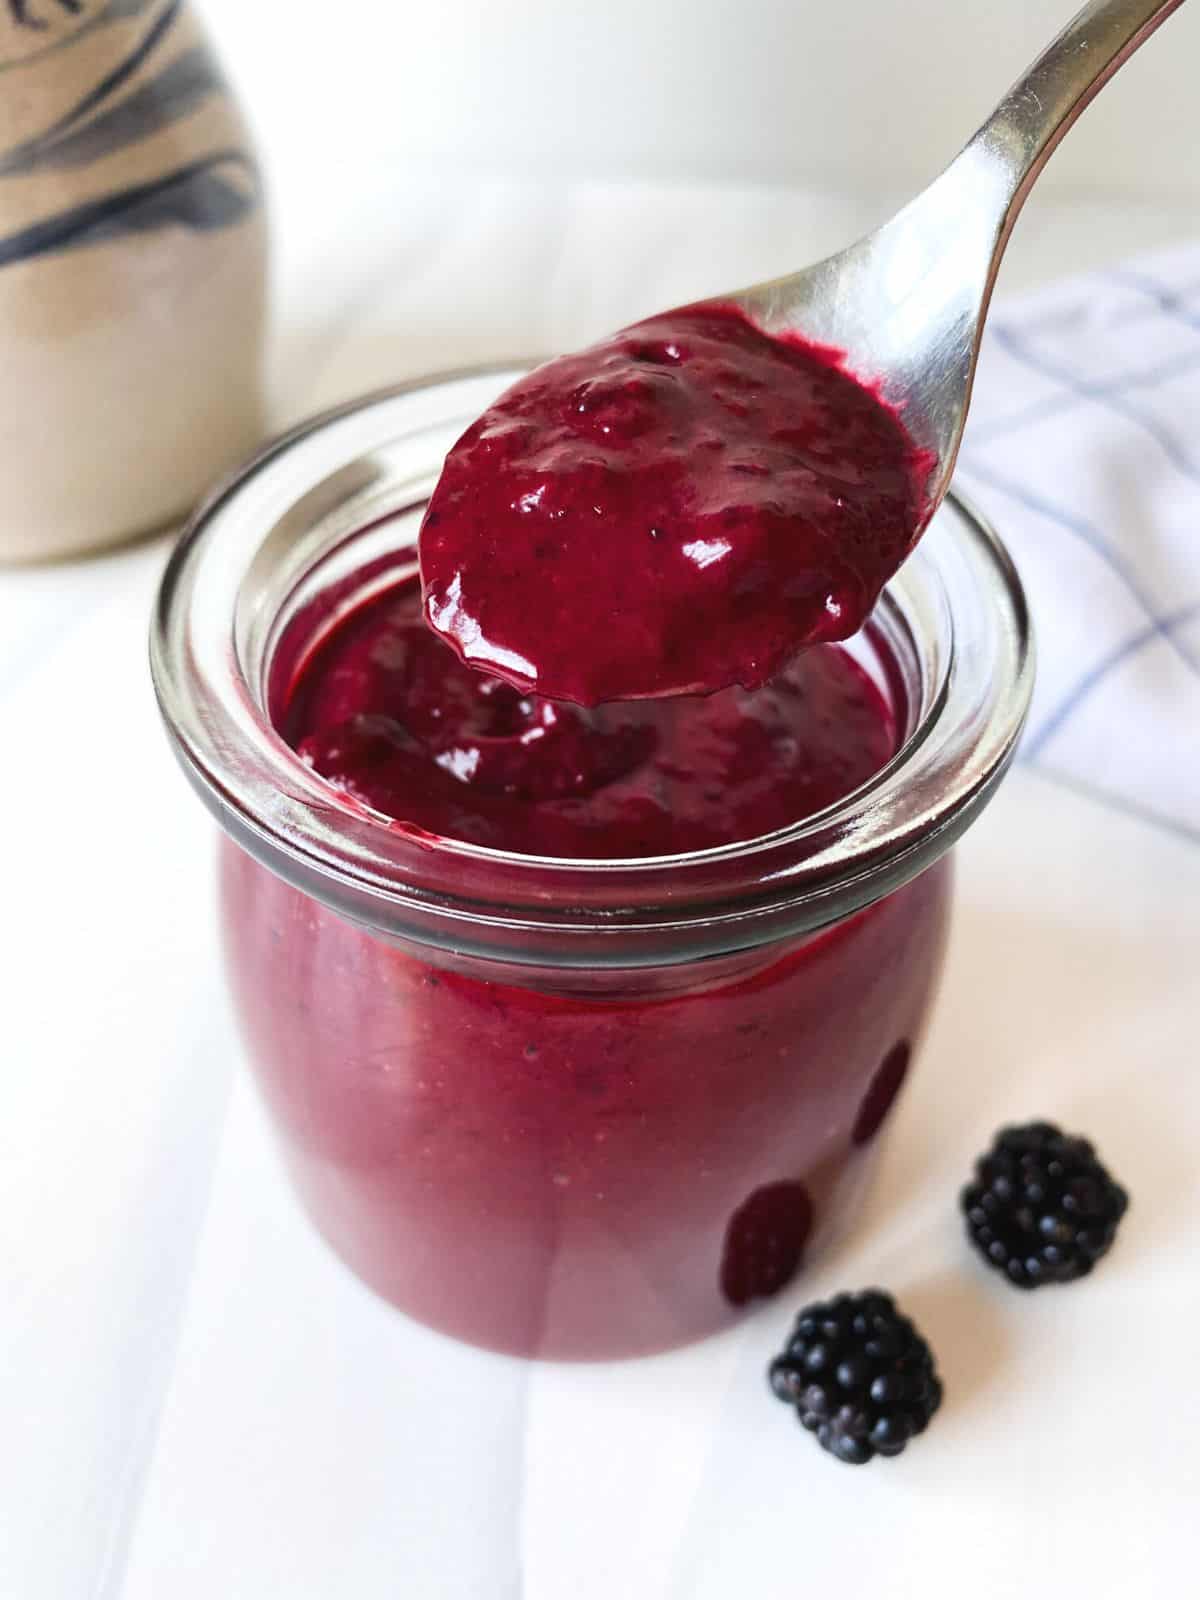 blackberry vinaigrette in a glass jar with a spoonful being held above it.